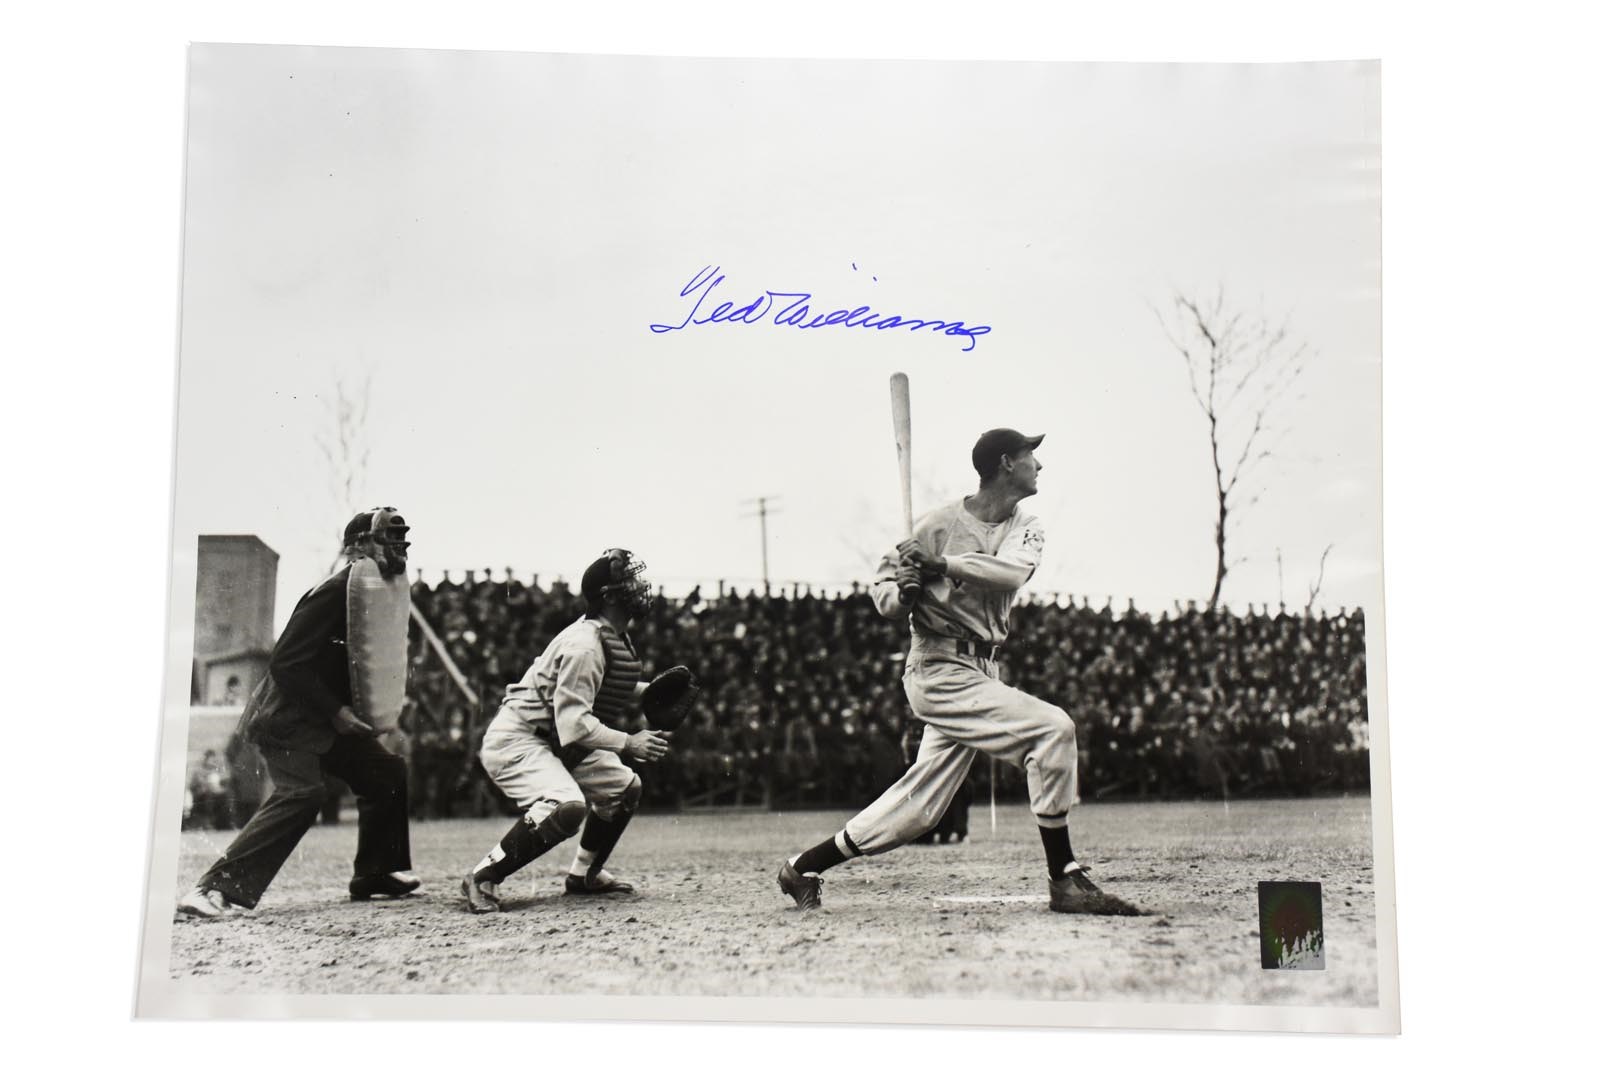 Baseball Autographs - Ted Williams "First Home Run" Signed Photo